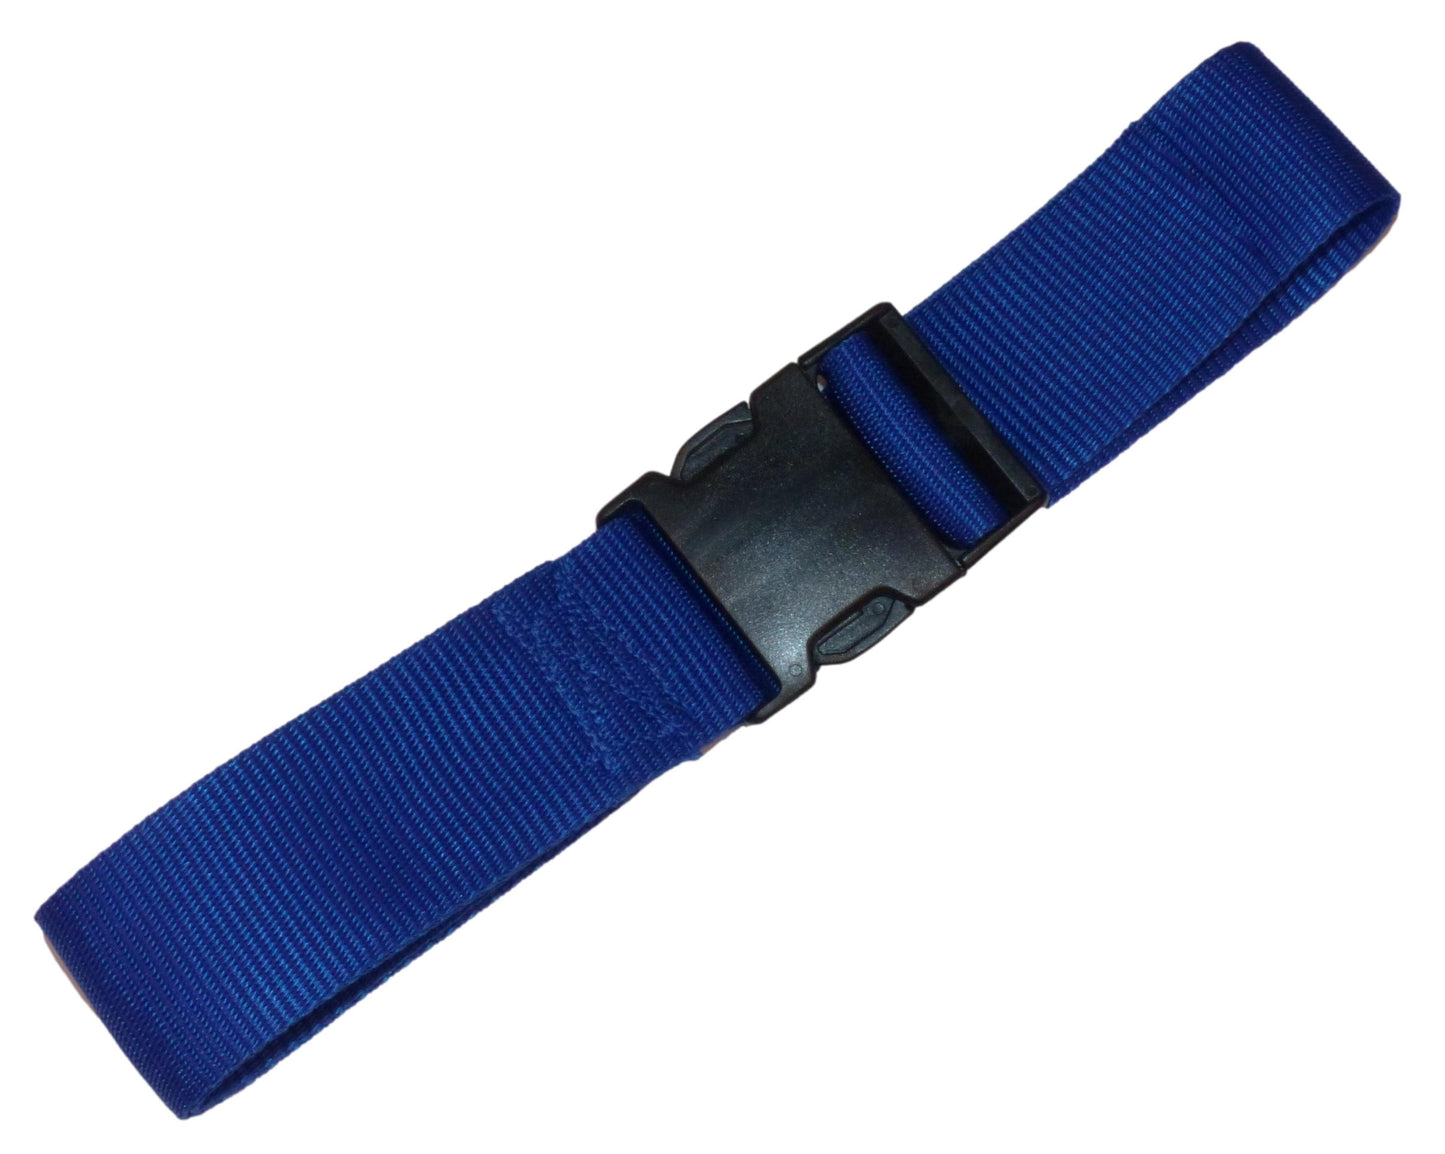 50mm Webbing Strap with Quick Release Buckle